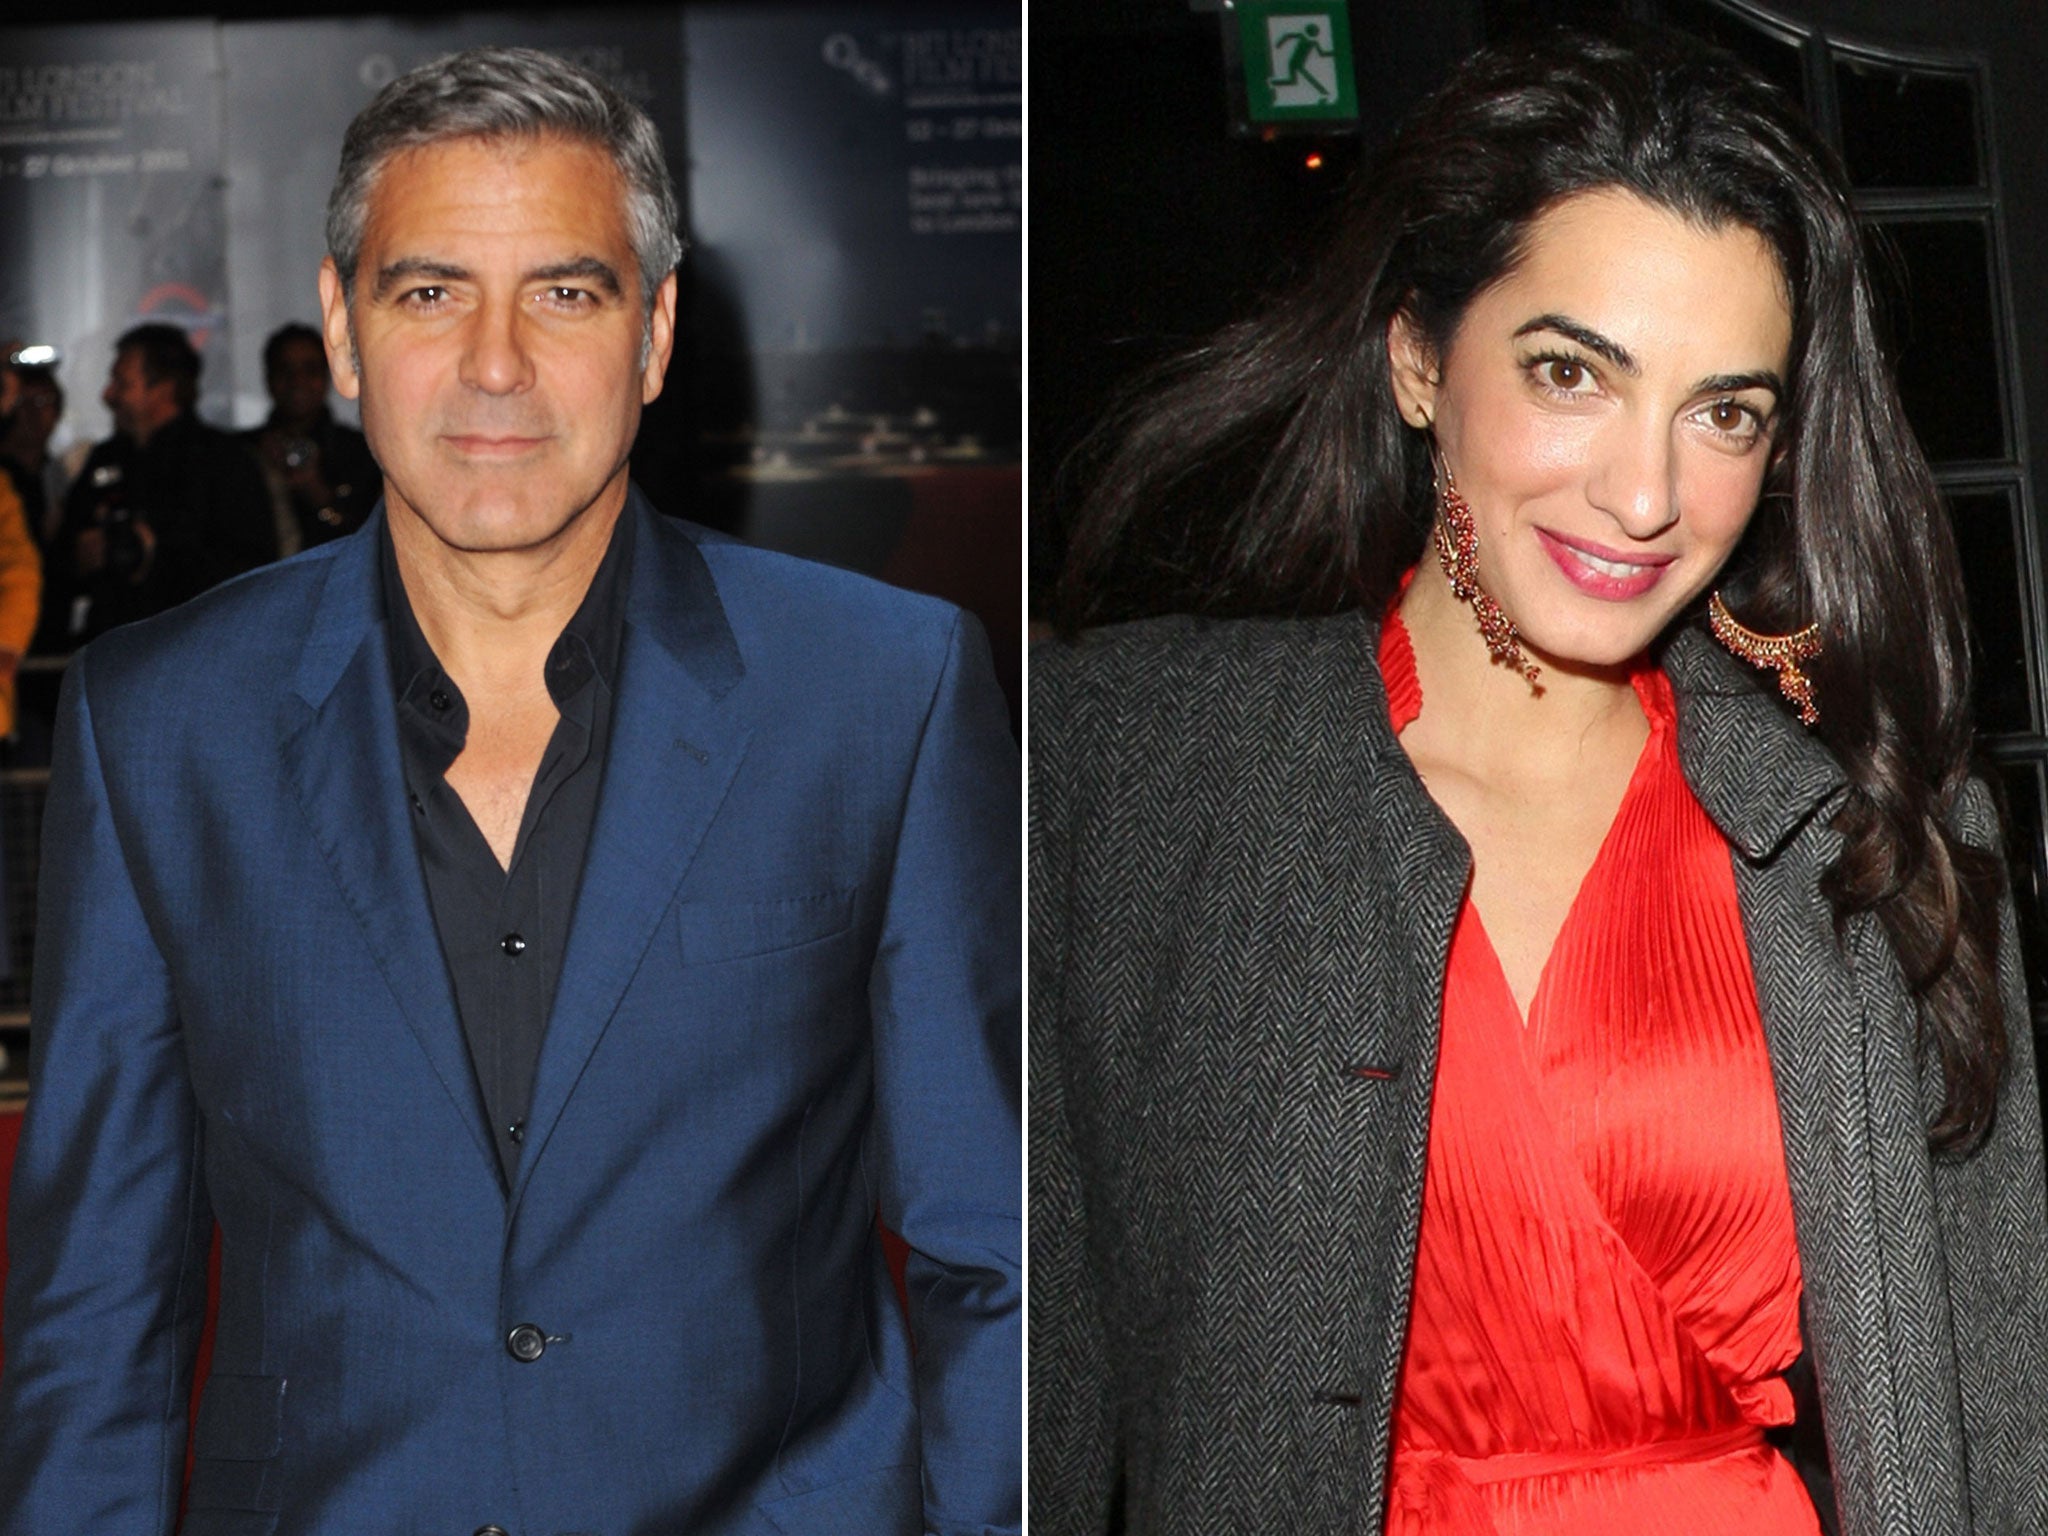 George Clooney Engaged To Amal Alamuddin Actor To Marry British Human Rights Lawyer Who Has